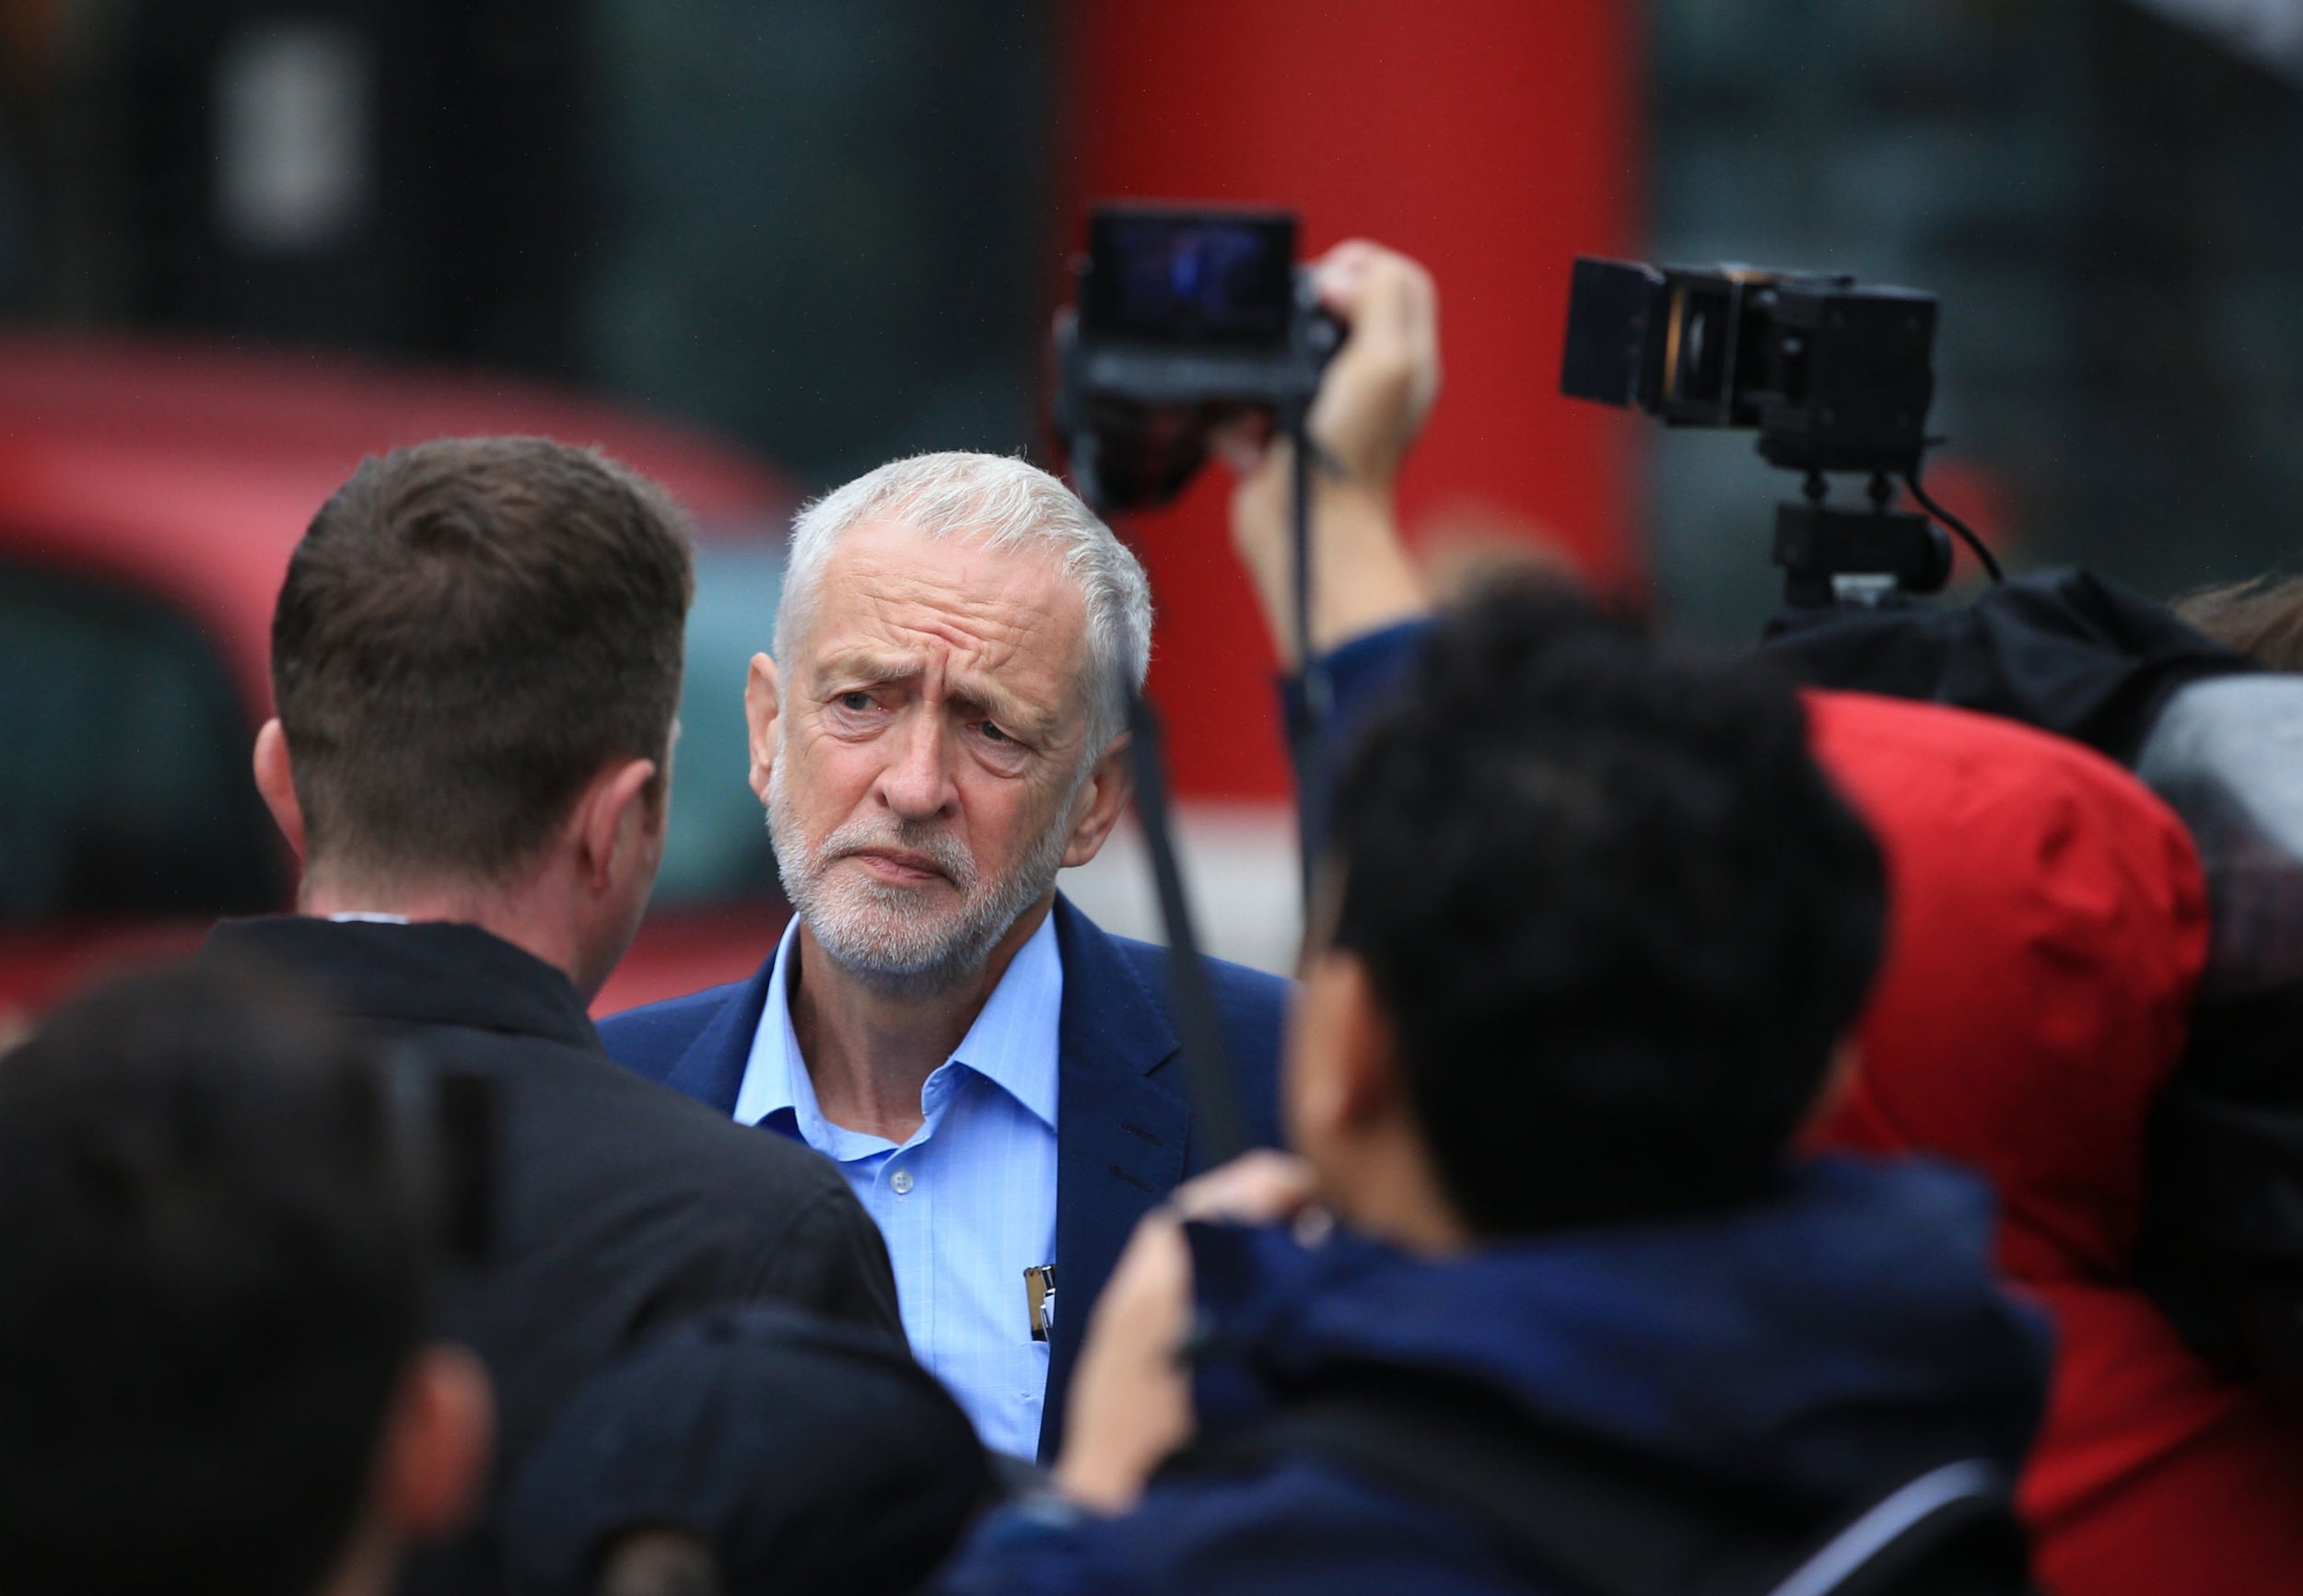 The spotlight will be on the Labour leader over his position on Brexit as his party gathers in Liverpool later this month